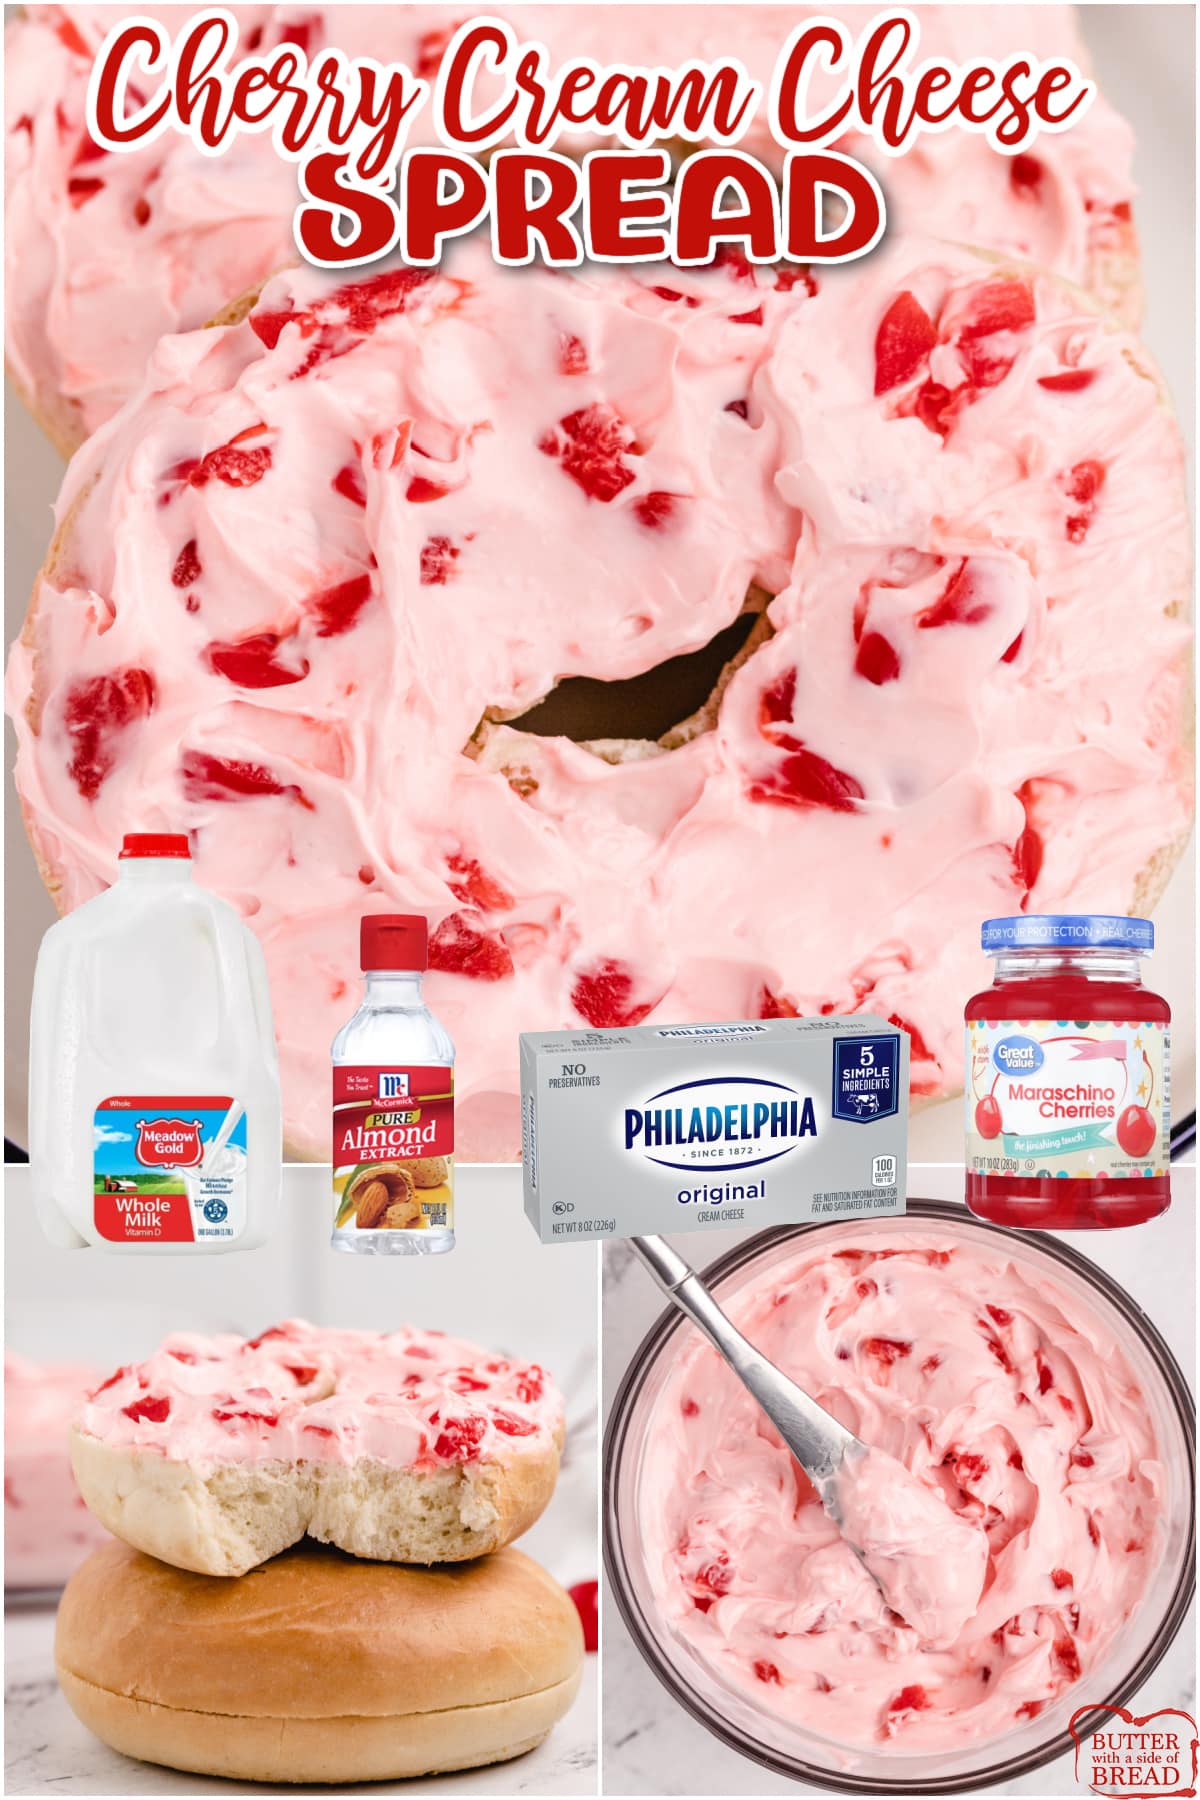 Cherry Cream Cheese Spread is a delicious recipe that is made in 5 minutes and with only 5 simple ingredients! This cream cheese maraschino cherry spread is perfect on bagels or toast.